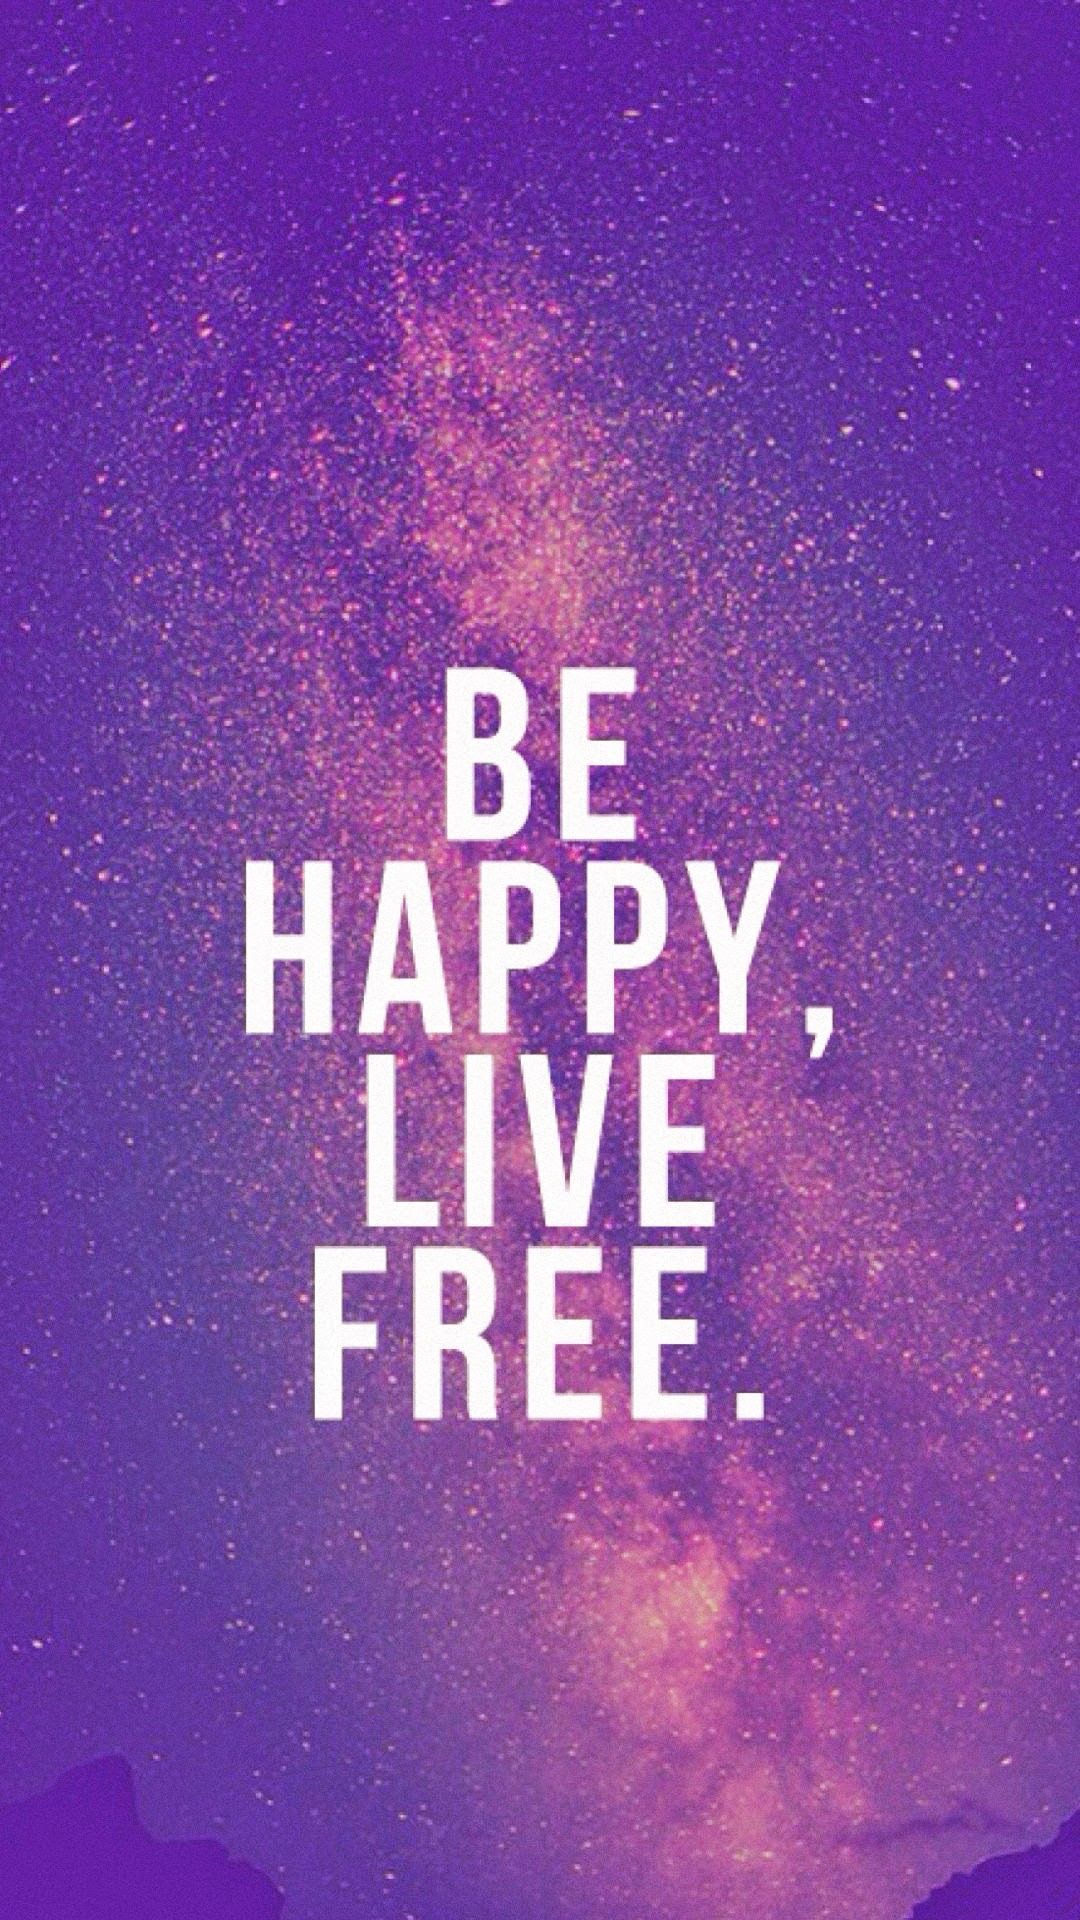 Be Happy, Live Free - Happy Iphone - HD Wallpaper 